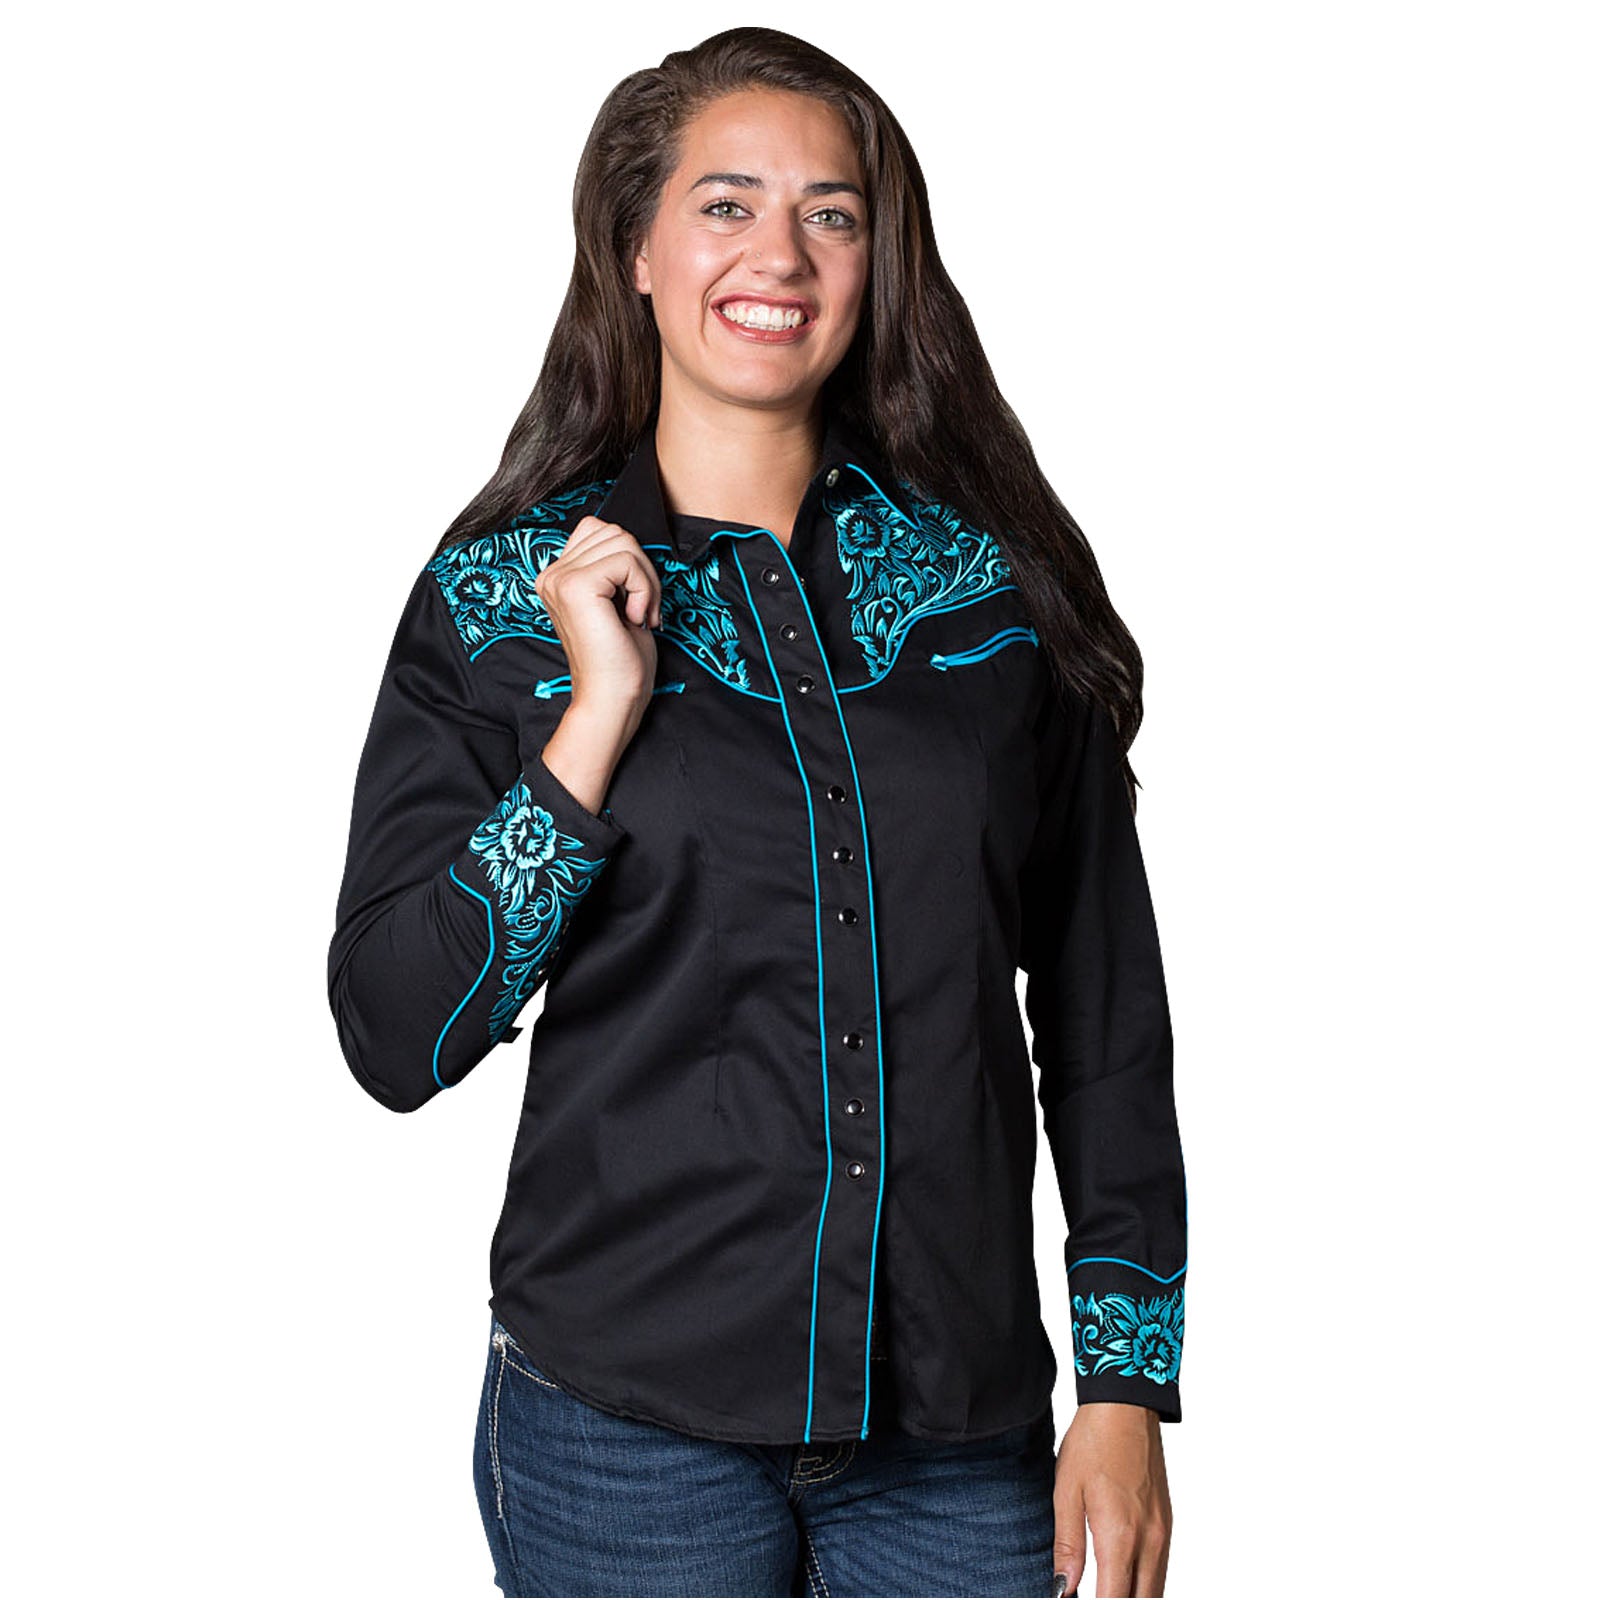 Women's Vintage Tooling Embroidery Black & Turquoise Western Shirt - Rockmount